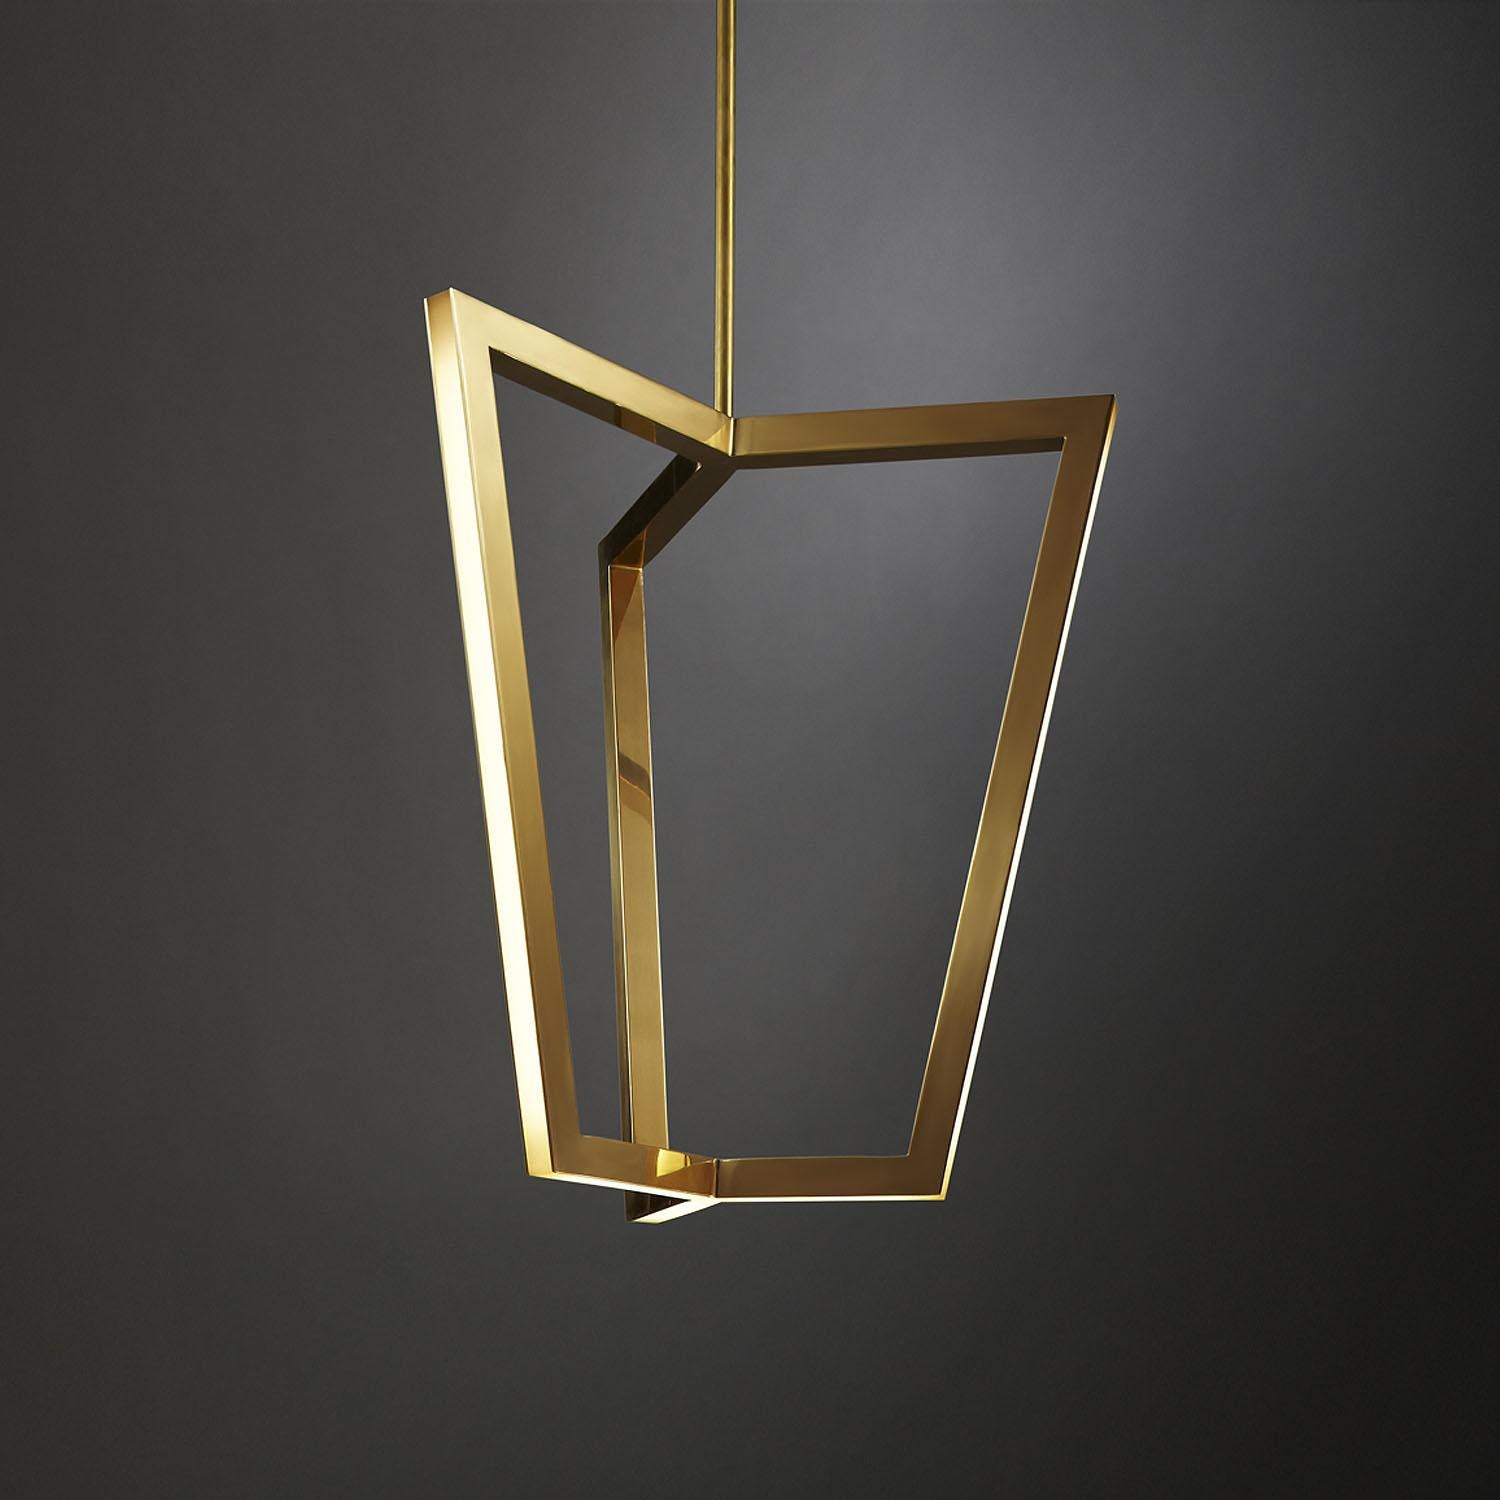 Contemporary polished brass pendant light - Triptyx by Christopher Boots

Geometry, a core language of the ASTERIX series, is expressed as timeless objects of light. Reworking the concept of the traditional lantern to displace the light source